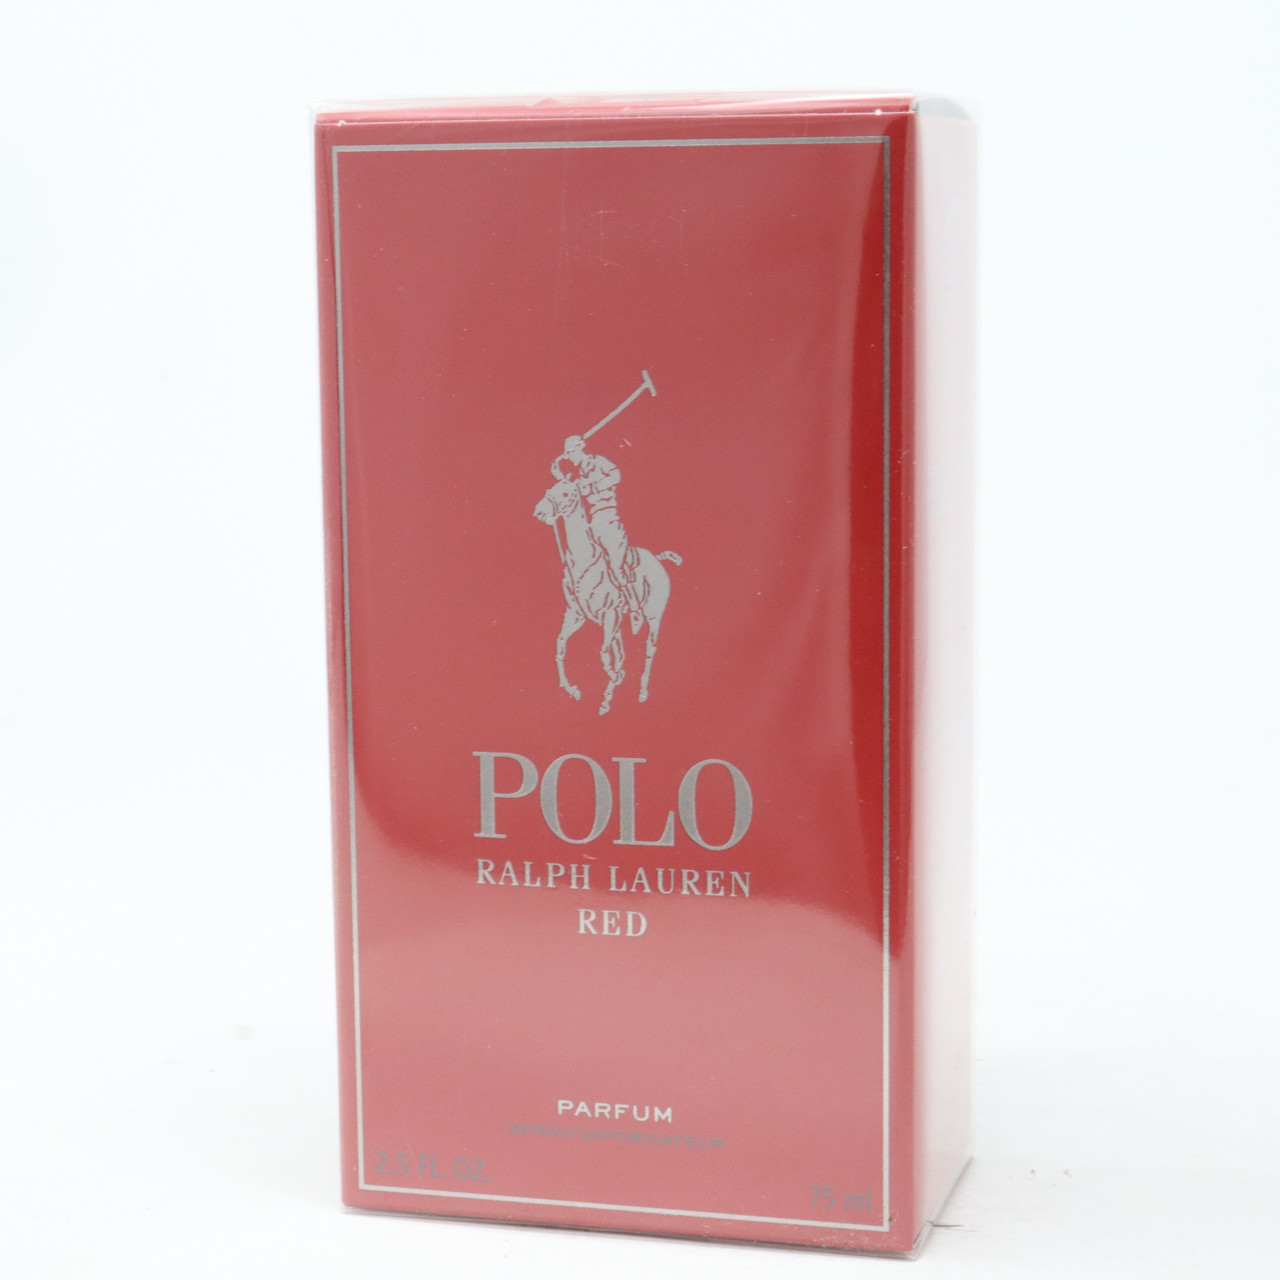 Polo Red by Ralph Lauren Parfum 2.5oz/75ml Spray New With Box